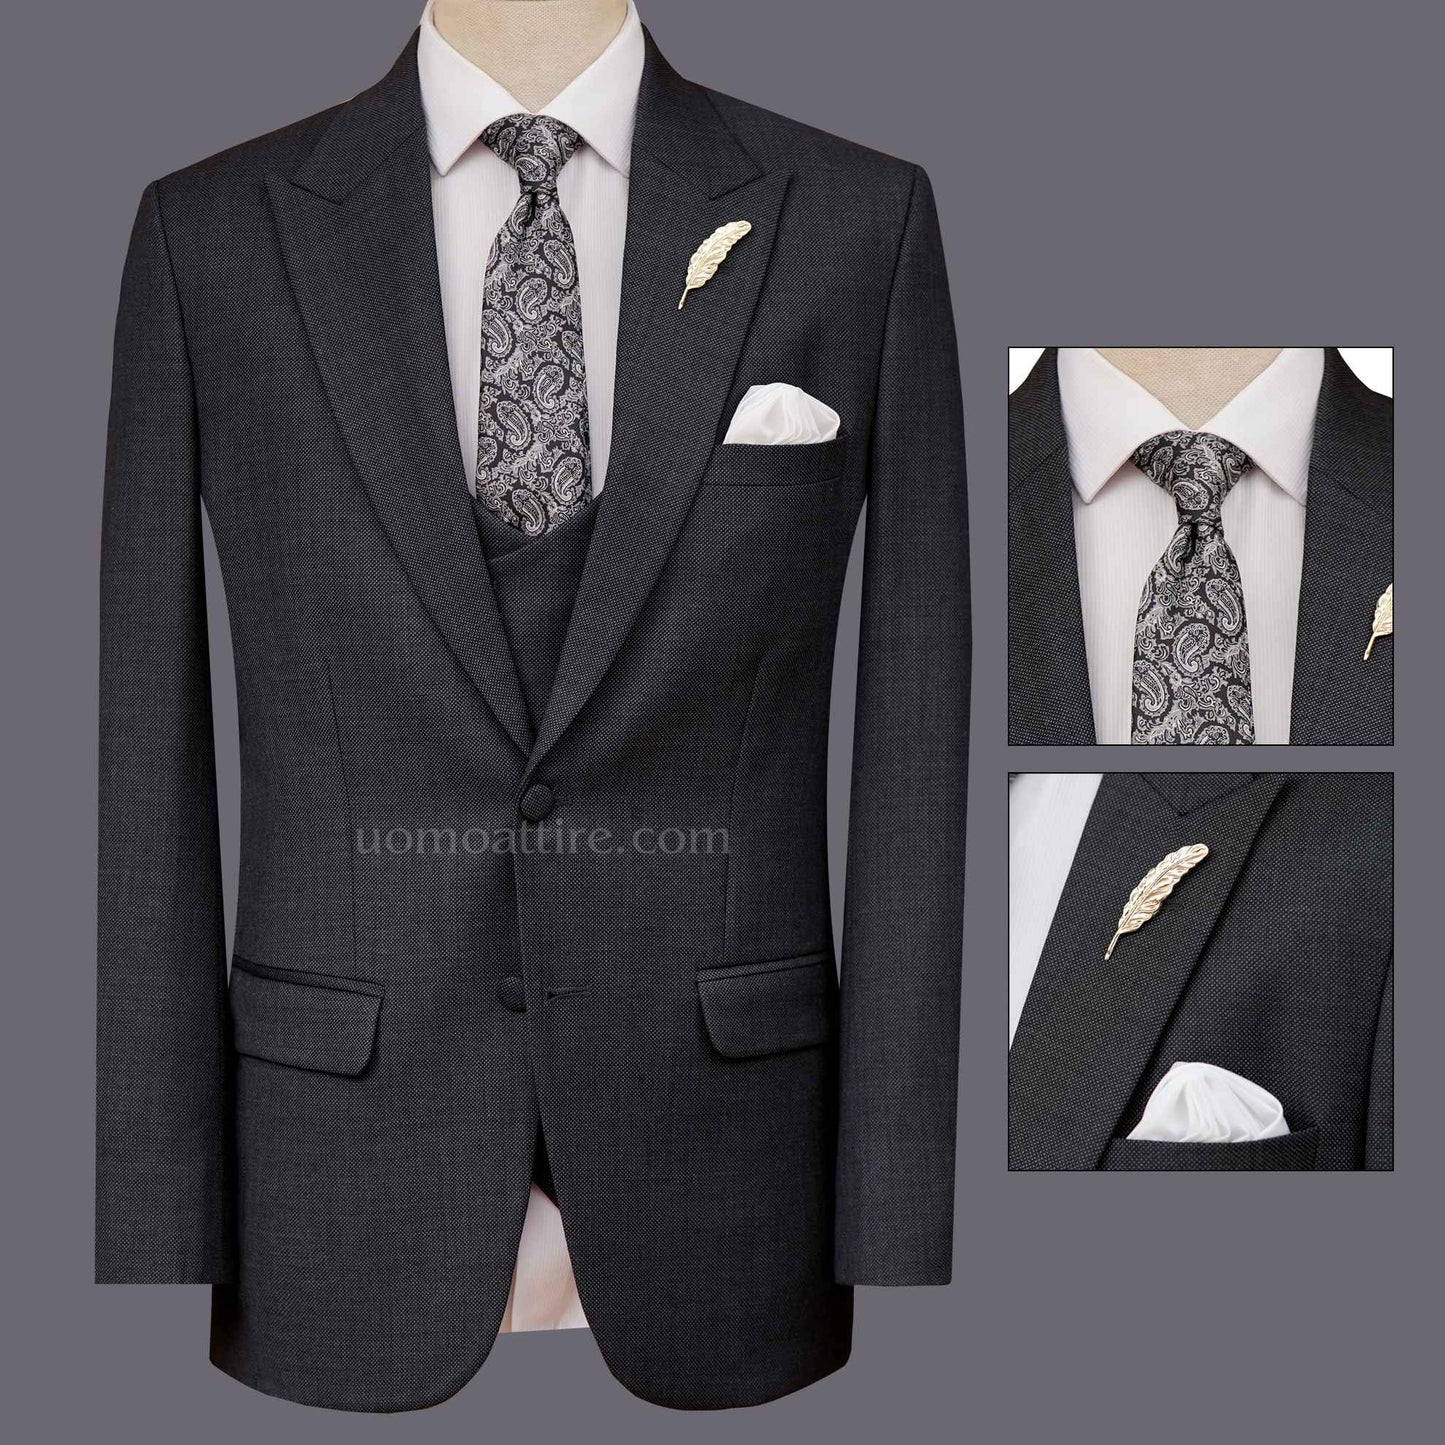 Formal Business Suit - Simple black suit with red tie - CleanPNG / KissPNG